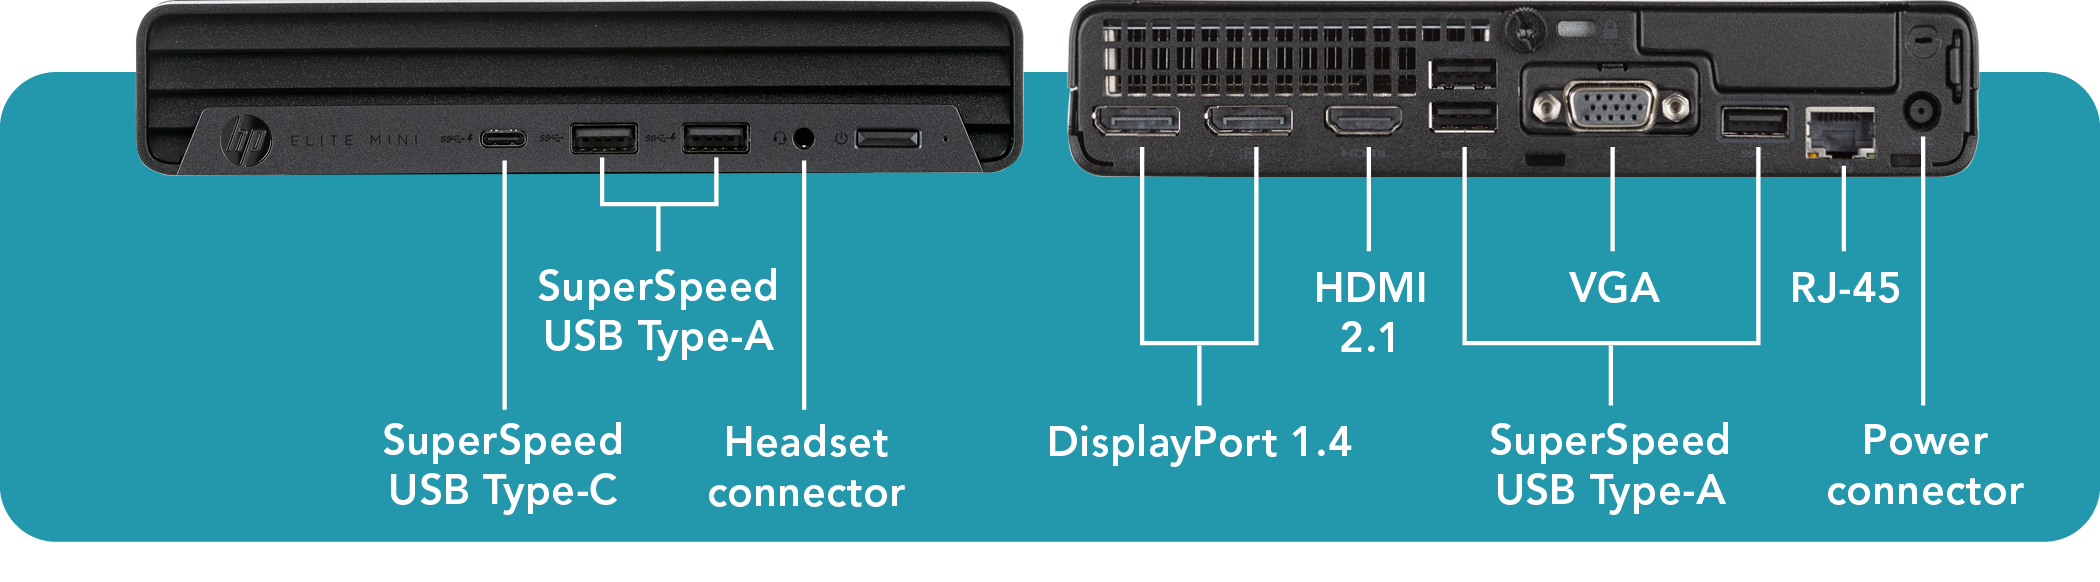 On the front, the HP Elite Mini 800 G9 features the following ports: 1 SuperSpeed USB Type-C, 2 SuperSpeed USB Type-A, and 1 headset connector. On the back, the HP Elite Mini 800 G9 features the following ports: 2 DisplayPort 1.4, 1 HDMI 2.1, 3 SuperSpeed USB Type-A, 1 VGA, 1 RJ-45, and 1 power connector.